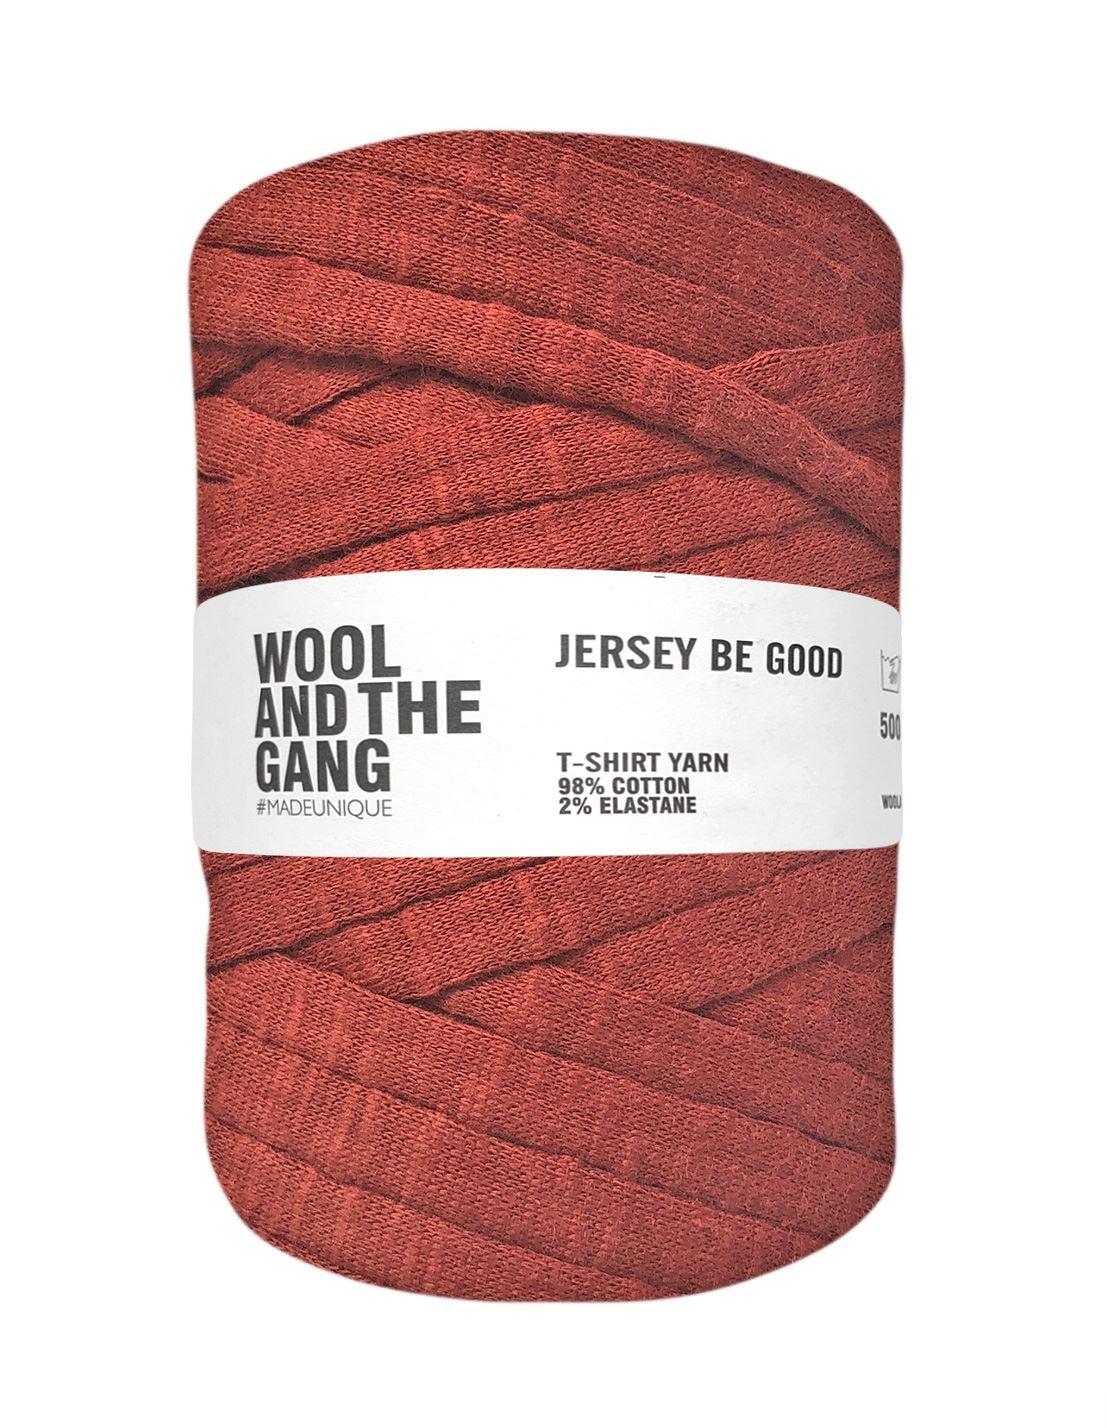 Amber brown Jersey Be Good t-shirt yarn by Wool and the Gang (500g)